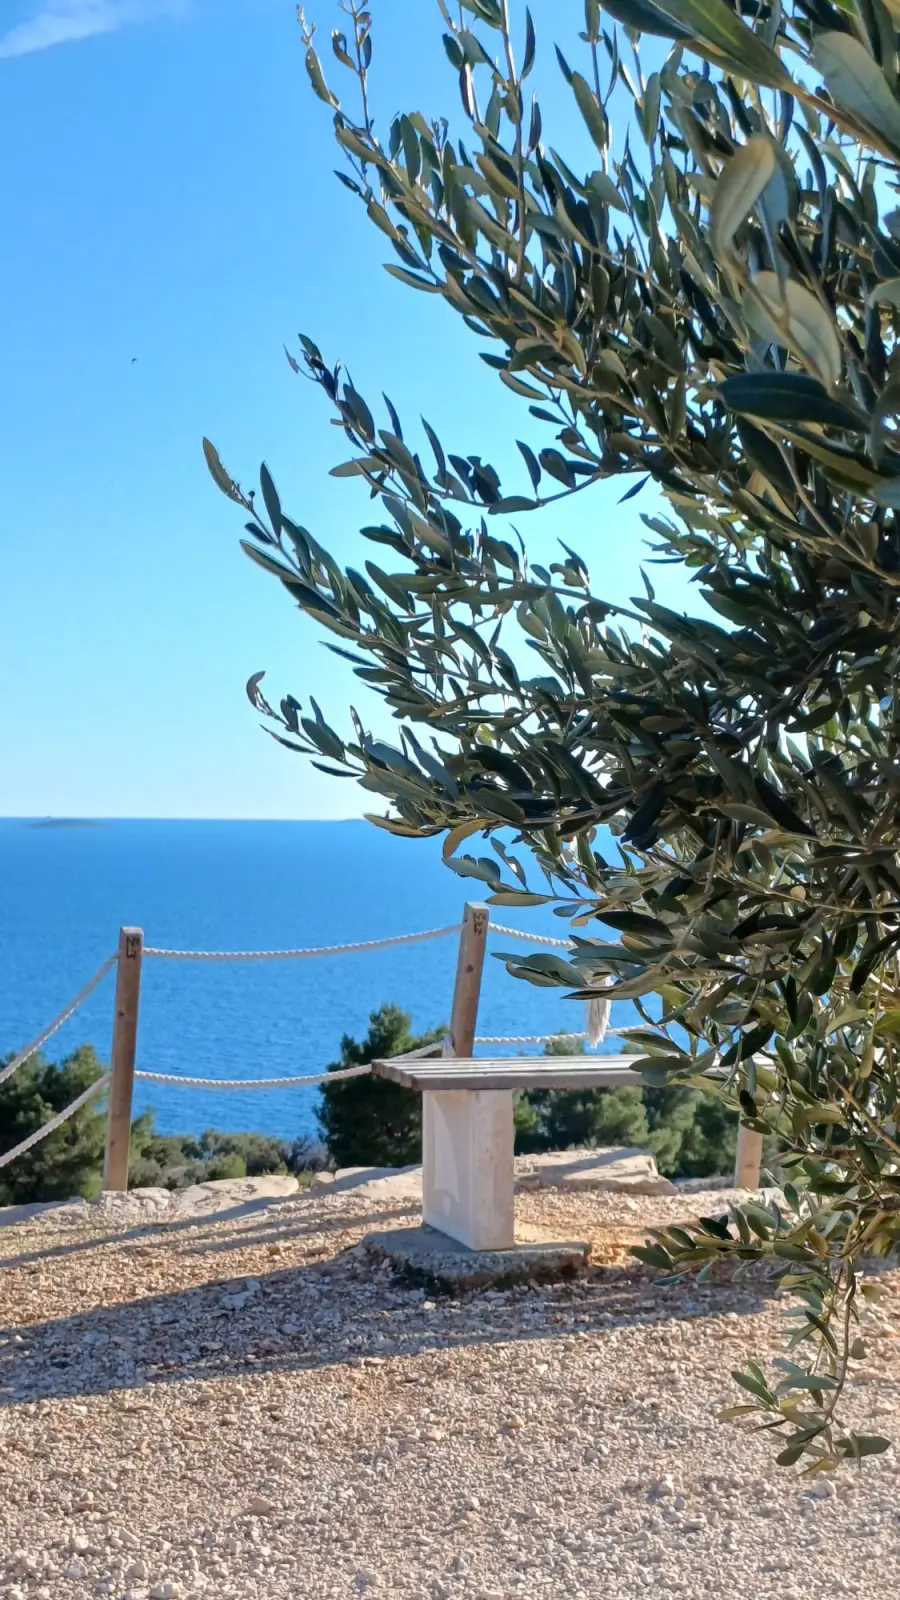 Wooden bench overlooking the sea. There is an olive tree next to the bench.